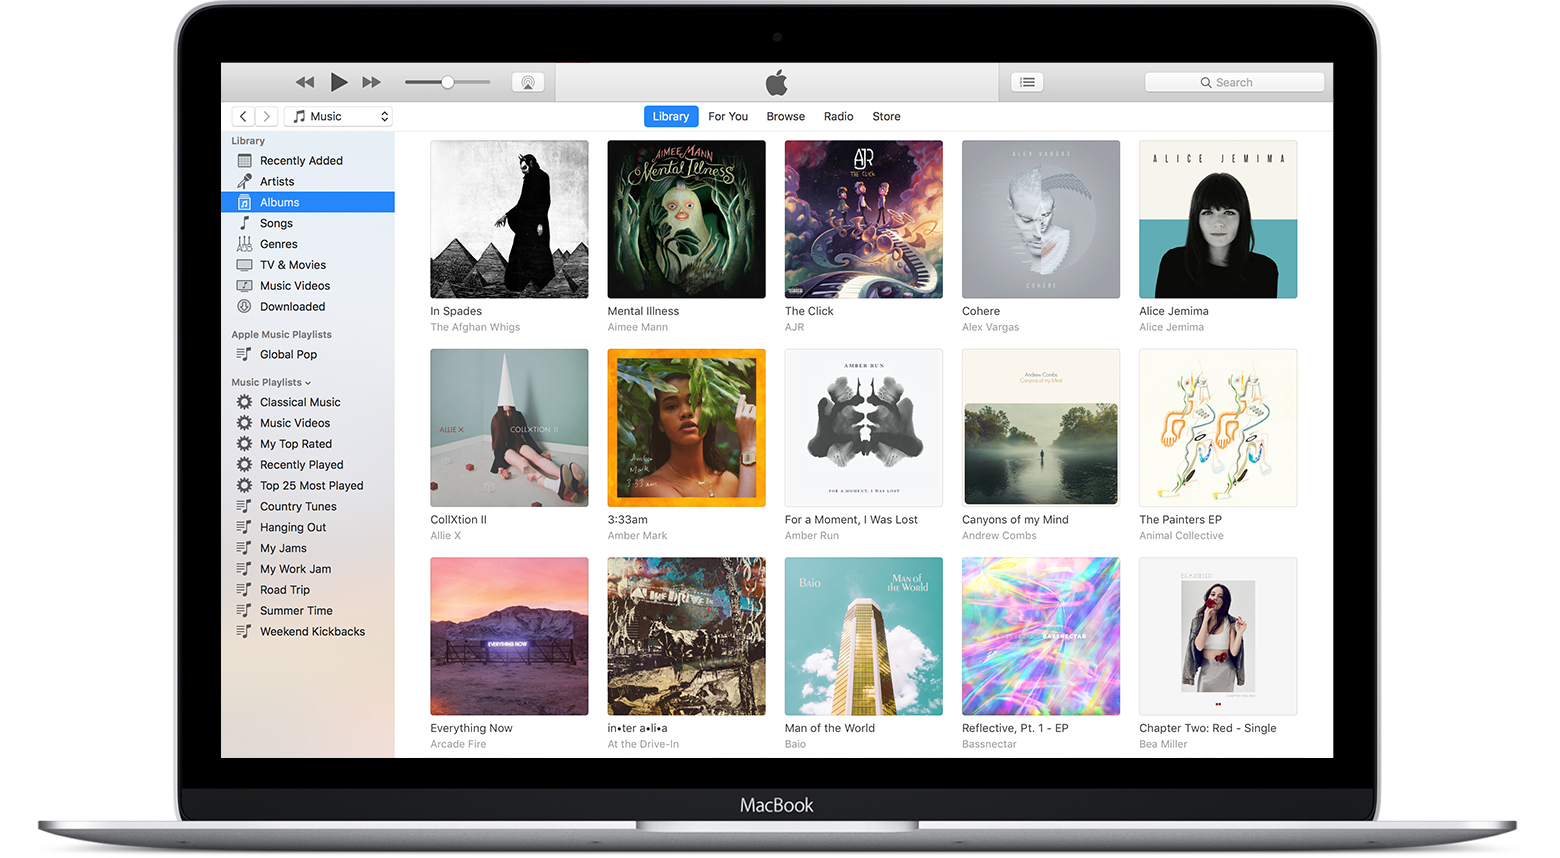 Download Itunes Movies To Mac